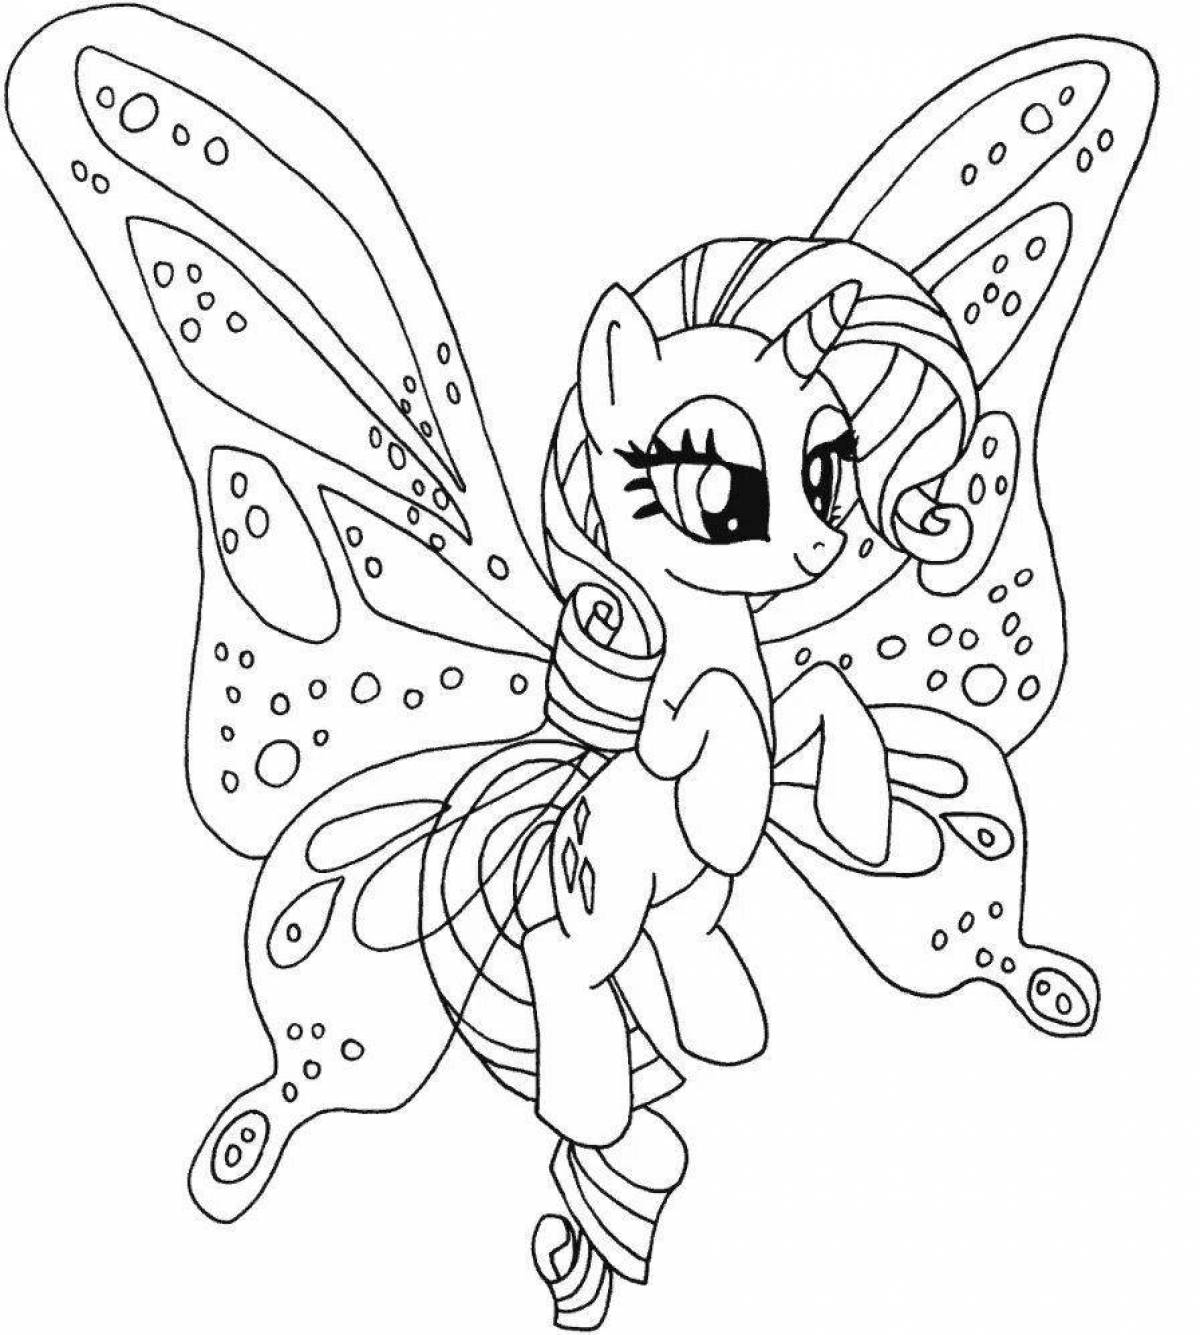 Coloring page dazzling pony for kids